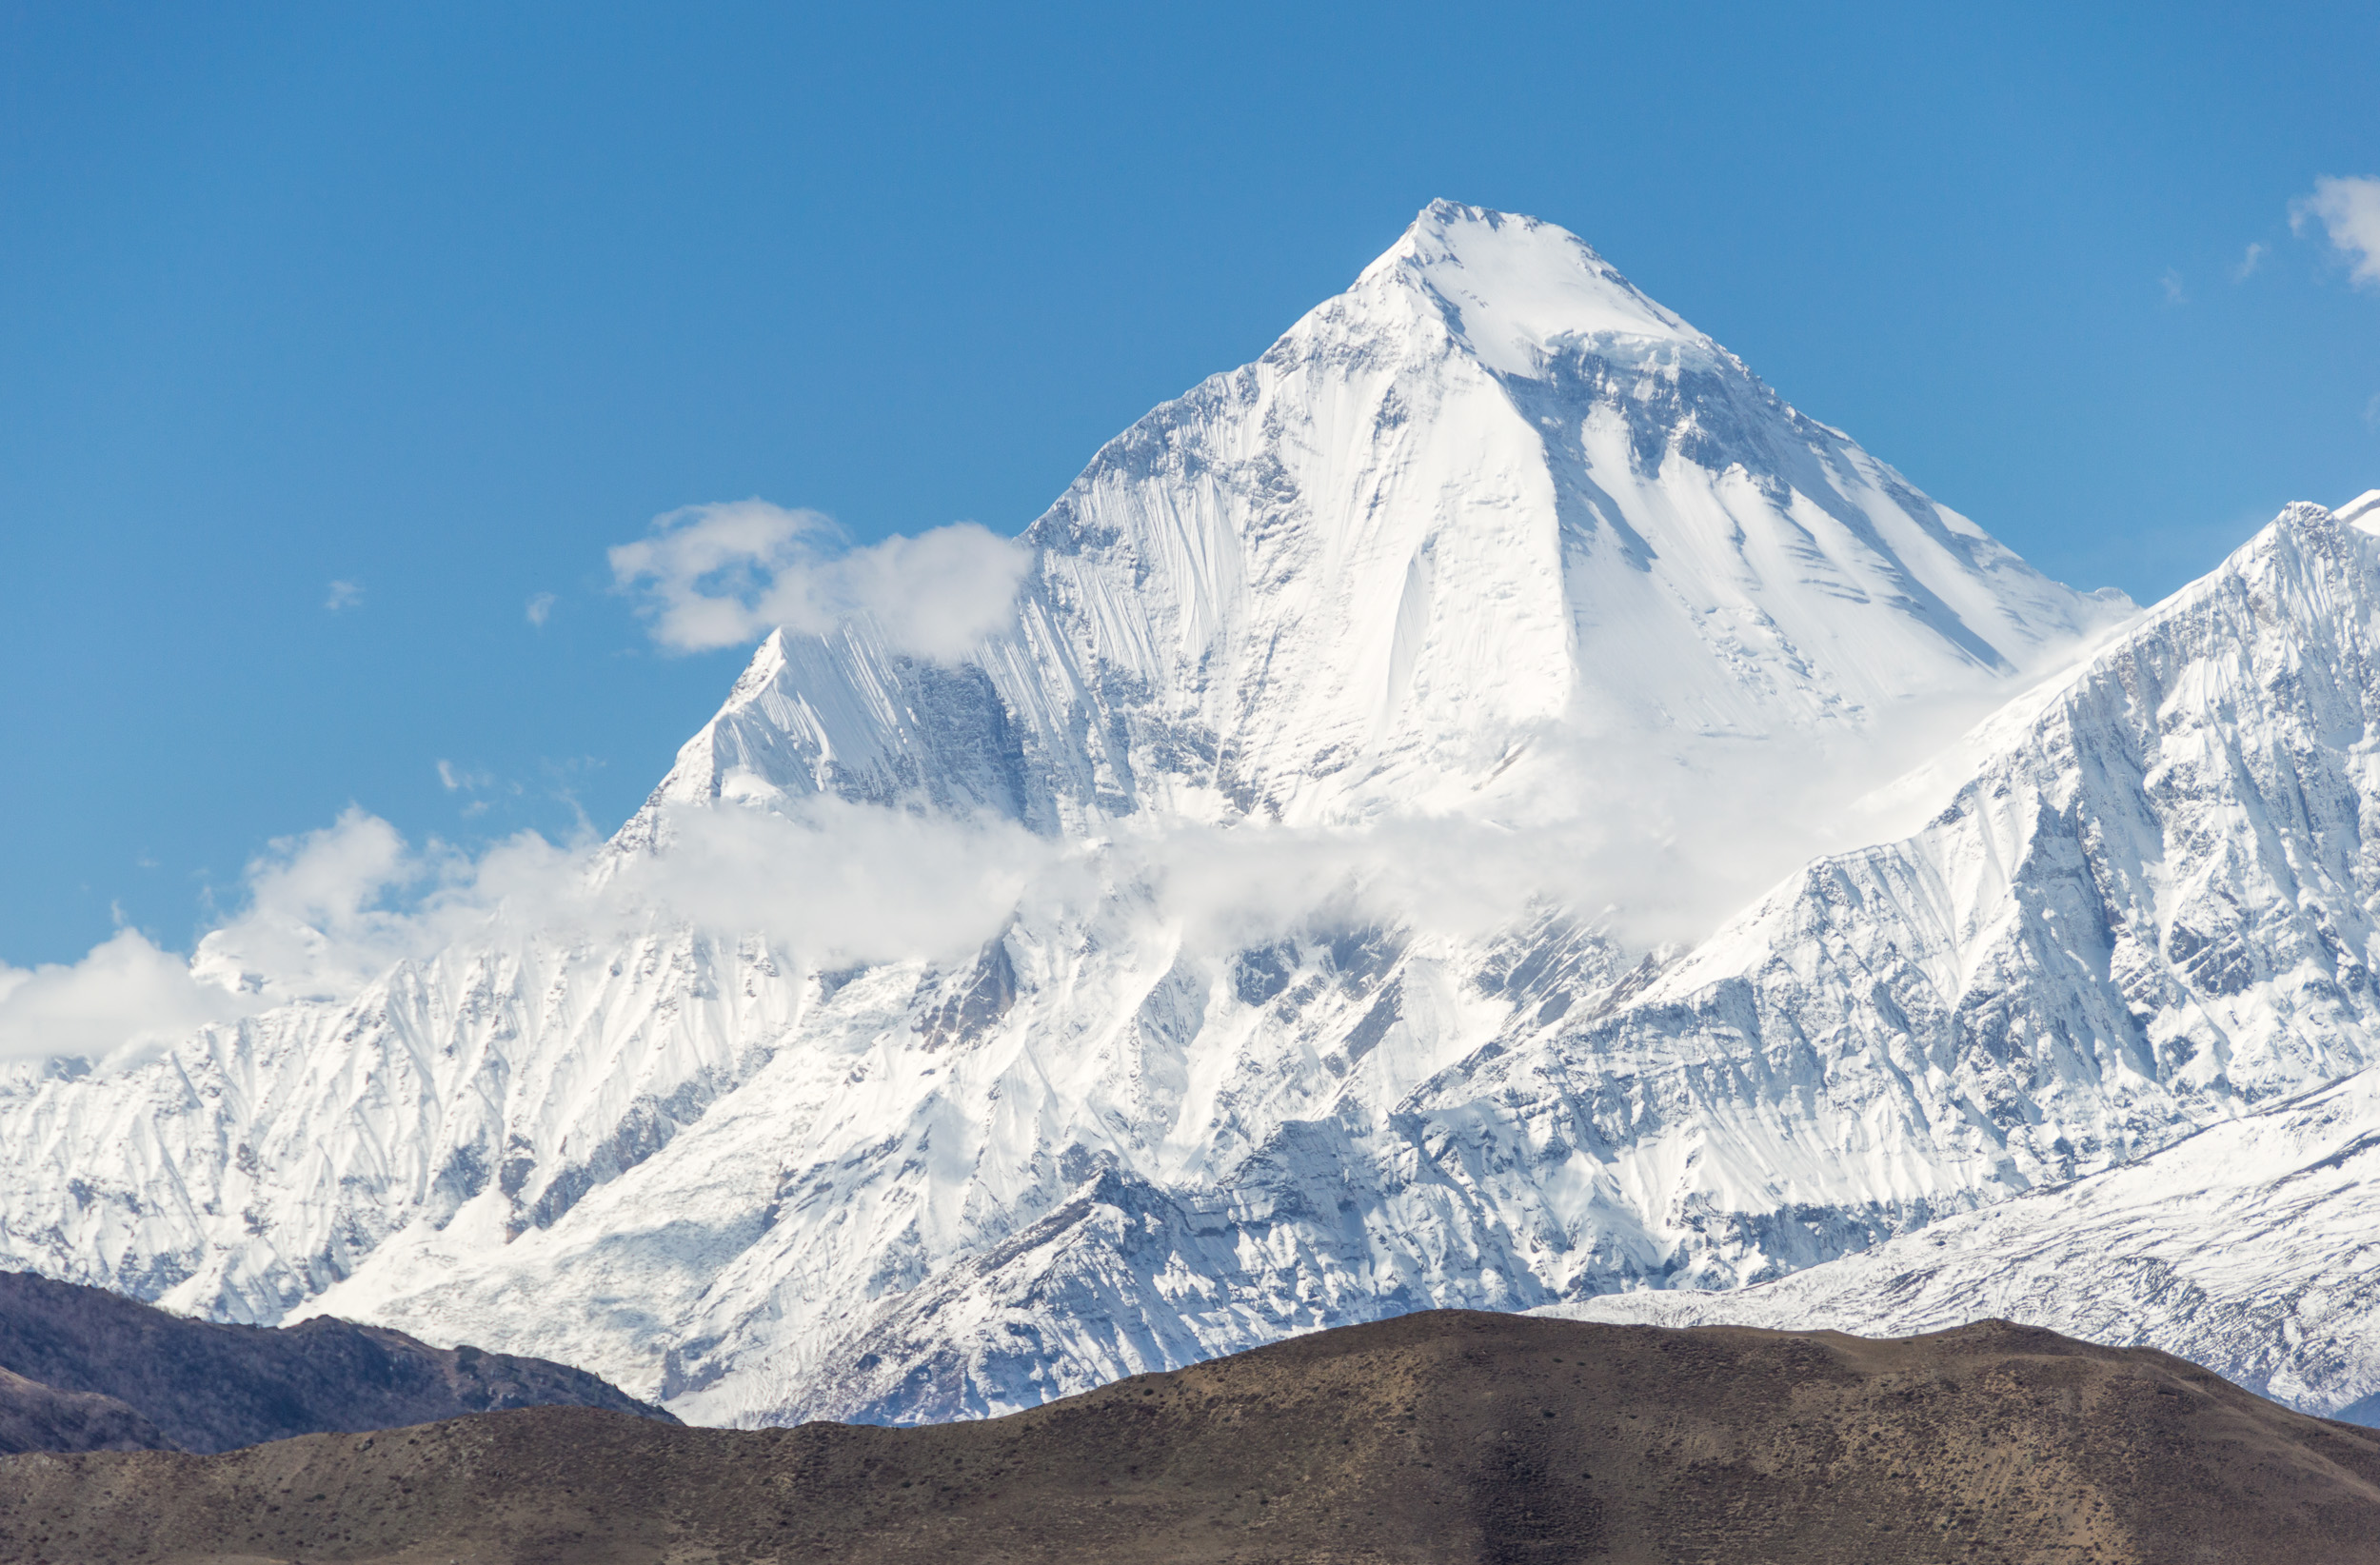 Climbers make rare ascent of Mt. Manaslu, first in 45 years